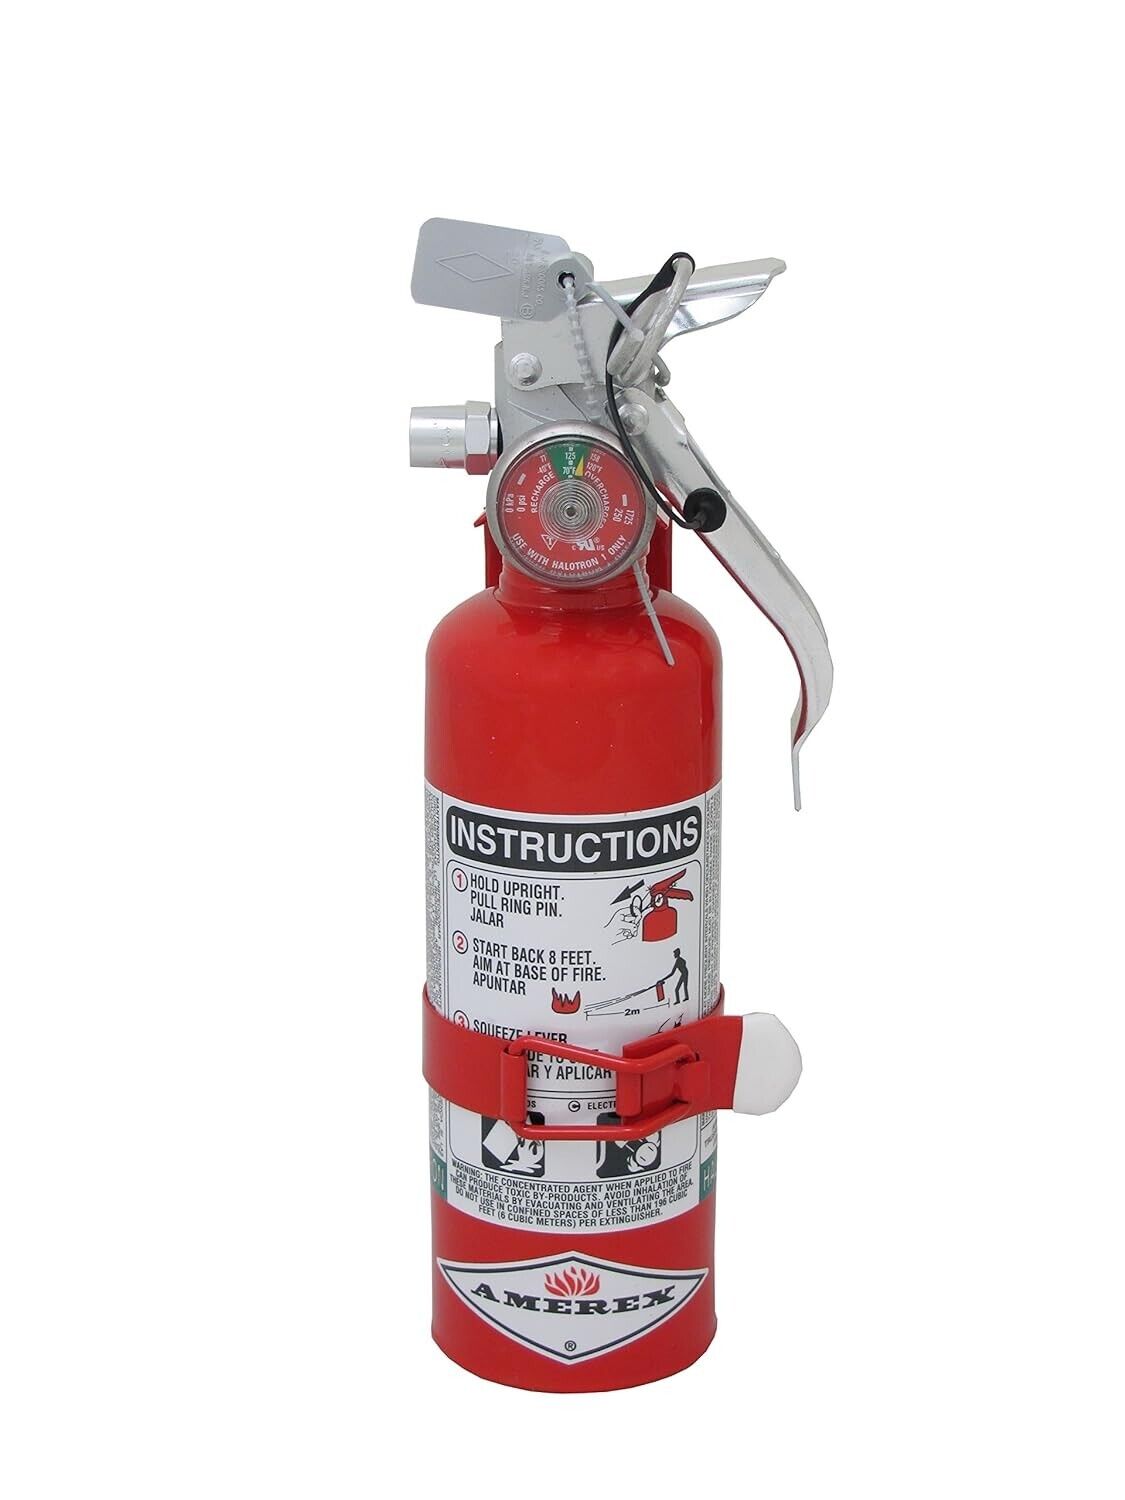 Halotron 1-Stored Pressure 1.4LBS Fire Extinguisher Corvette, and others